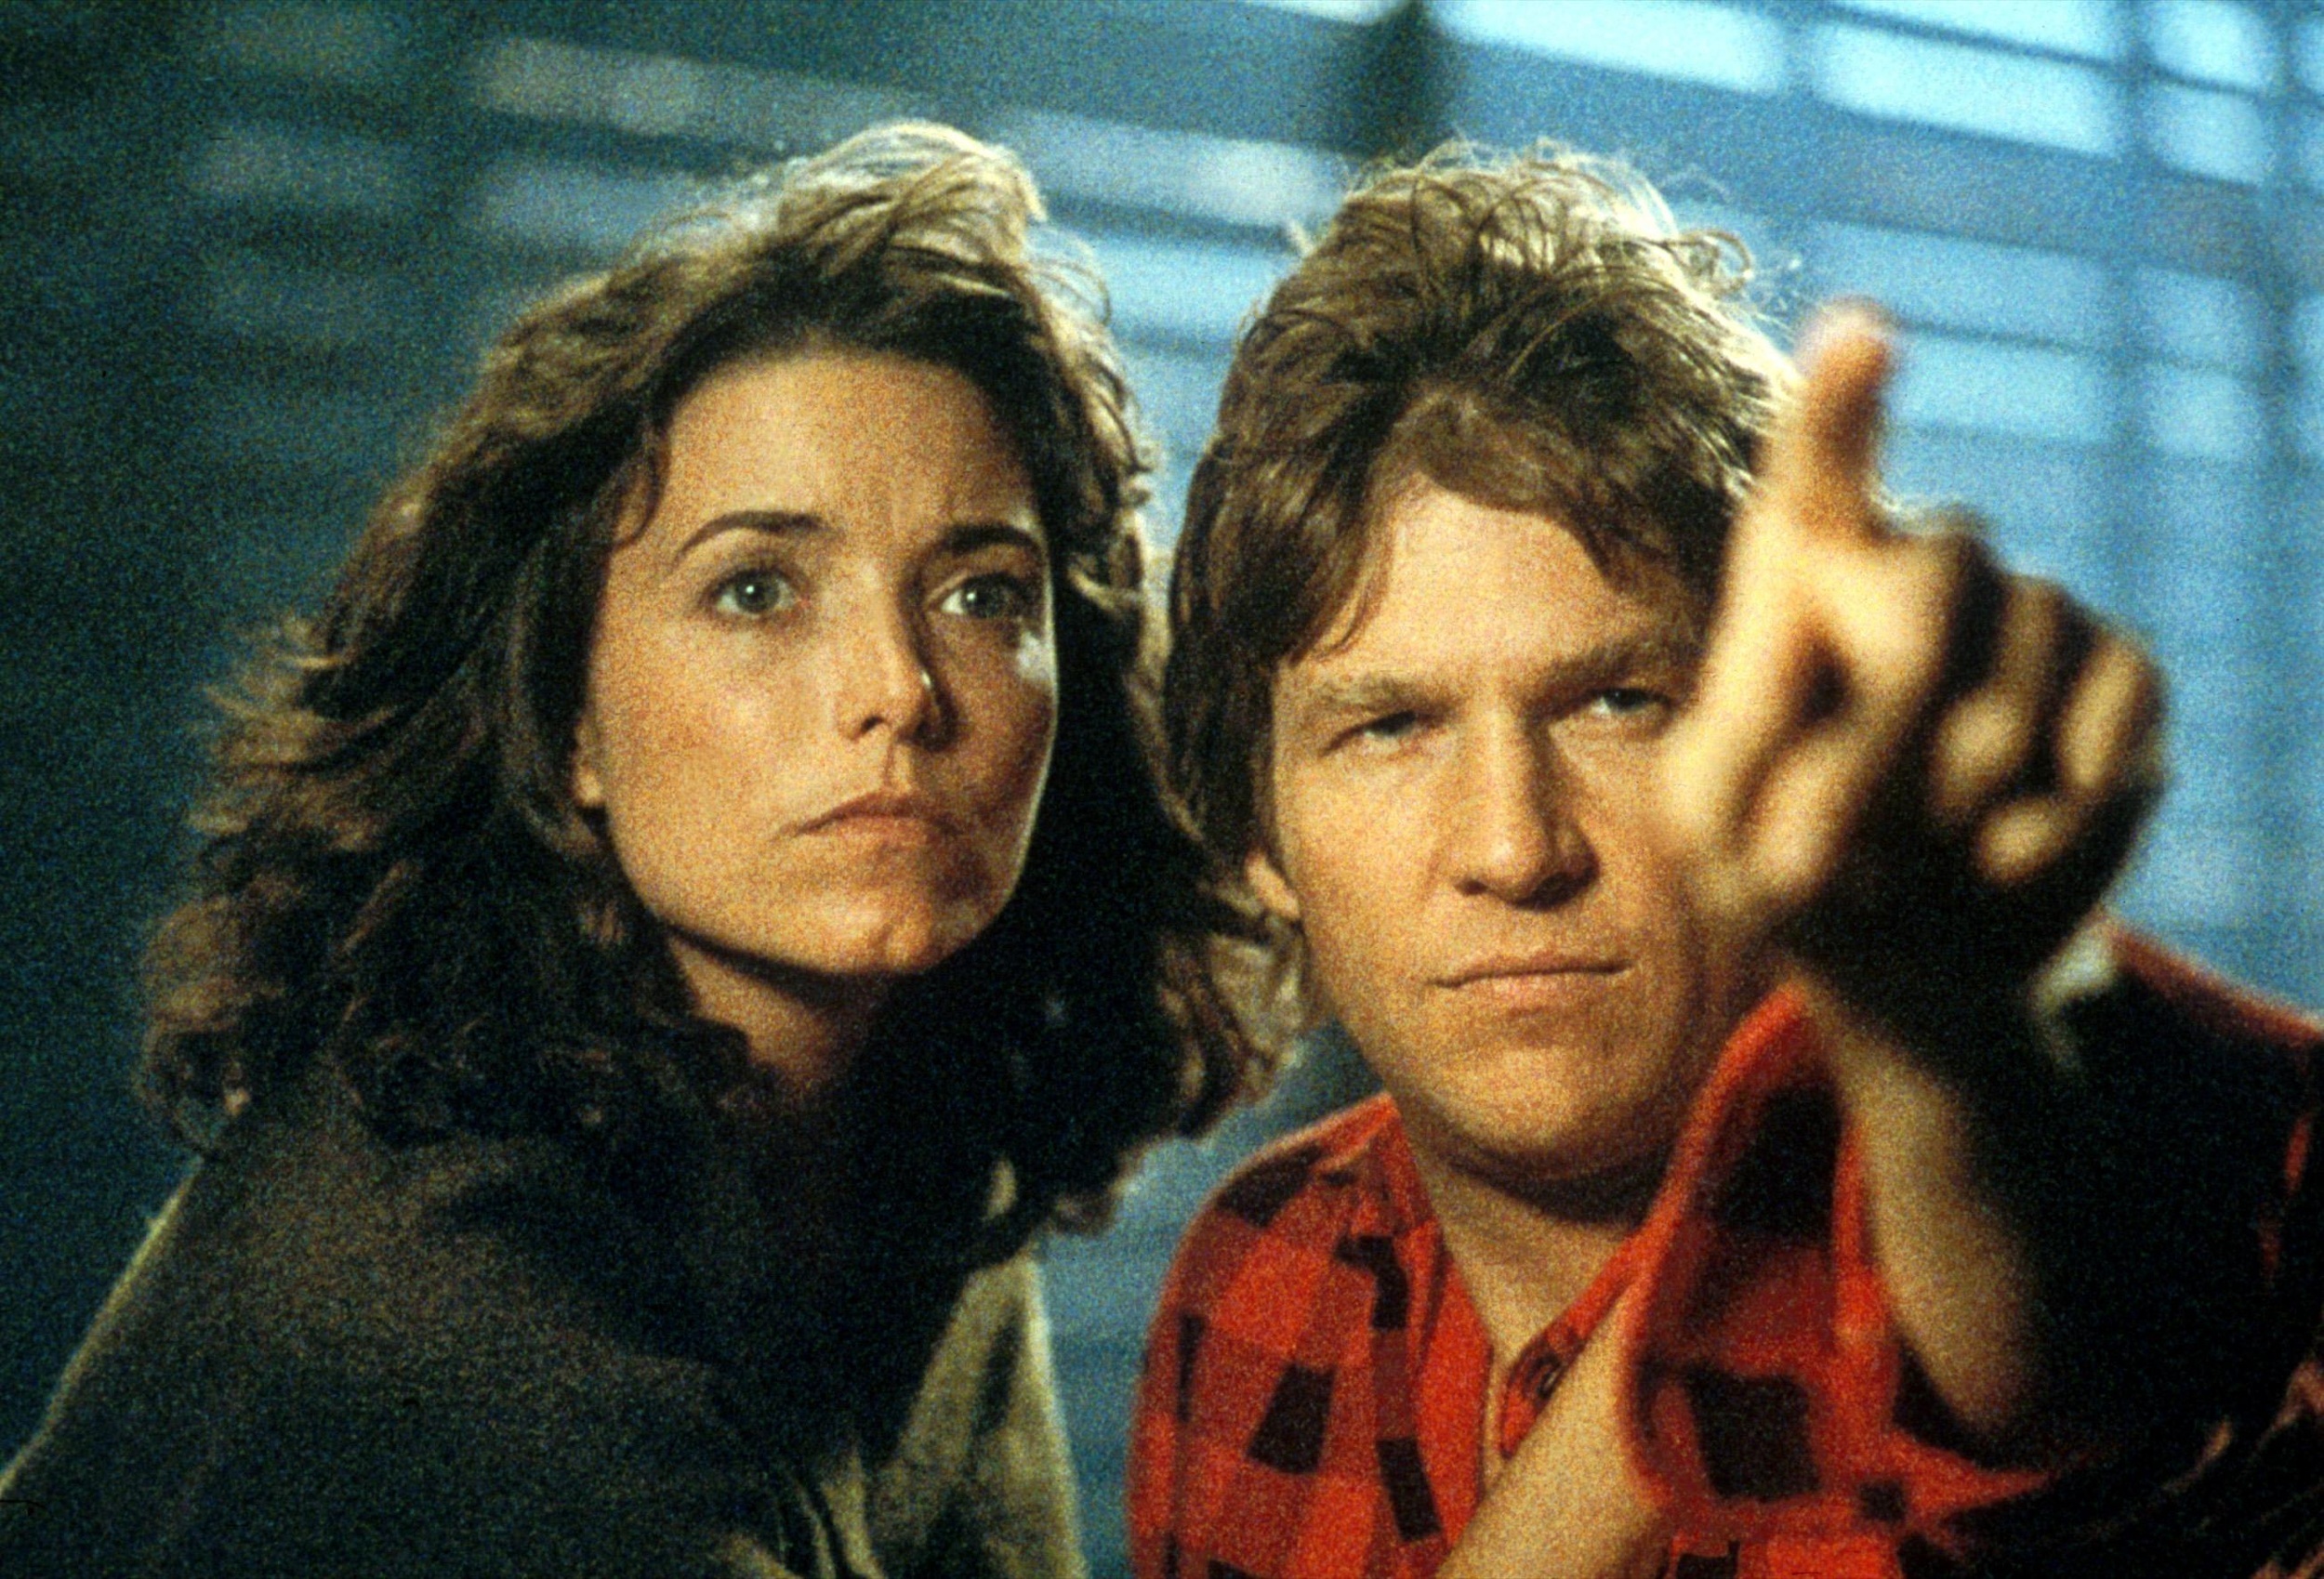 <p>This is a showy role, but Bridges doesn’t ham it up. He plays an alien who has taken on the image of Karen Allen’s dead husband. That means Bridges is playing an extraterrestrial not accustomed to moving or talking like a human. It’s a lot of “acting” business, but Bridges never goes too far. The Academy agreed, giving him a Best Actor nomination.</p><p><a href='https://www.msn.com/en-us/community/channel/vid-cj9pqbr0vn9in2b6ddcd8sfgpfq6x6utp44fssrv6mc2gtybw0us'>Follow us on MSN to see more of our exclusive entertainment content.</a></p>